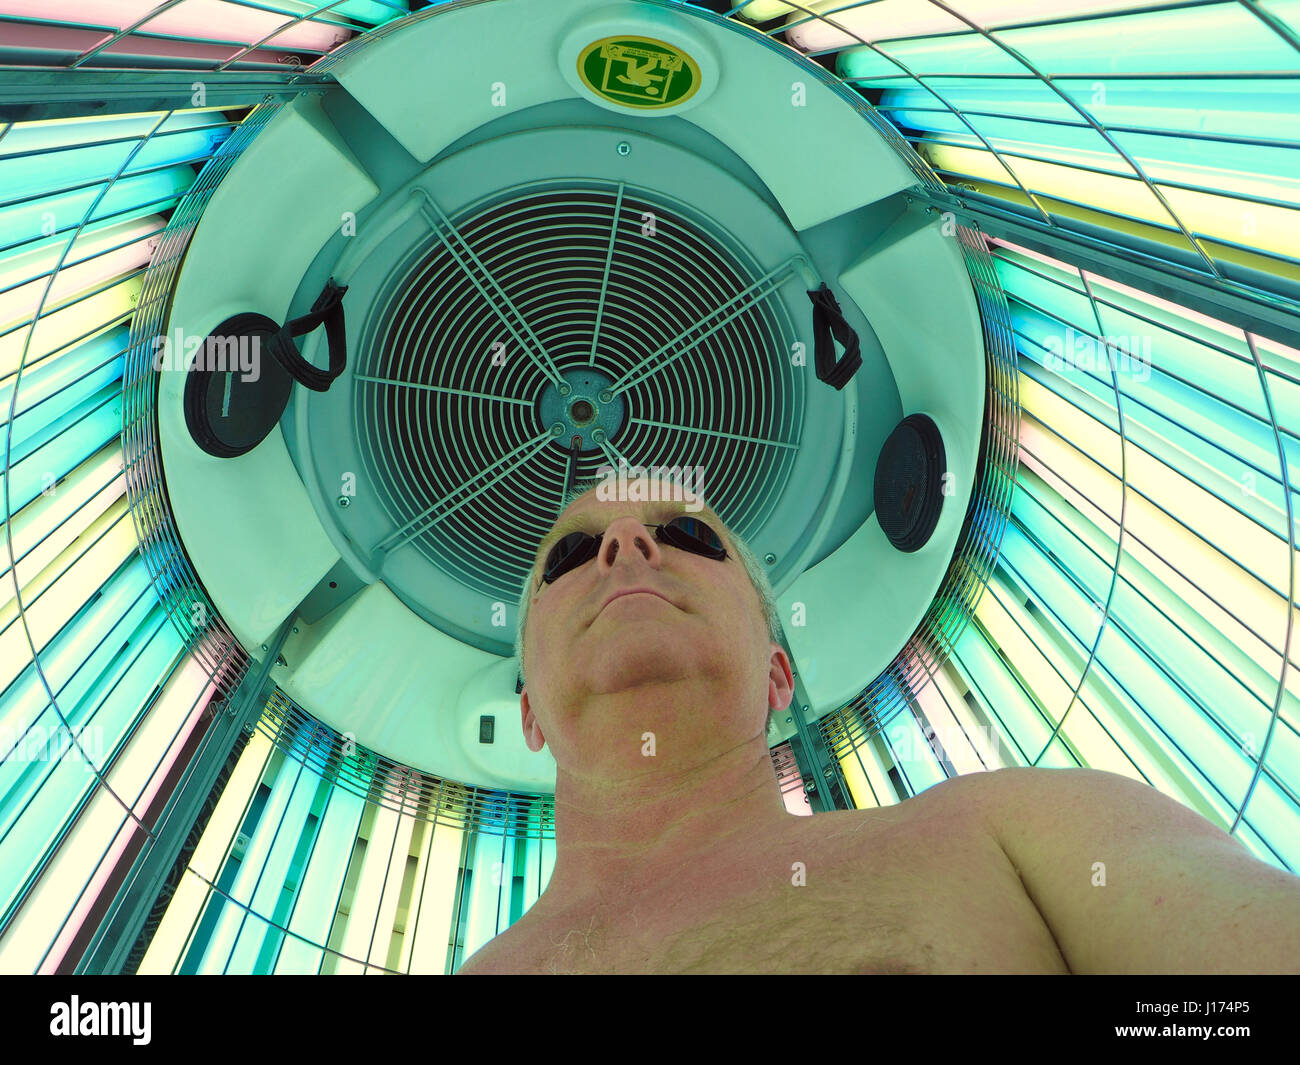 Man in a stand up UV tanning booth Stock Photo